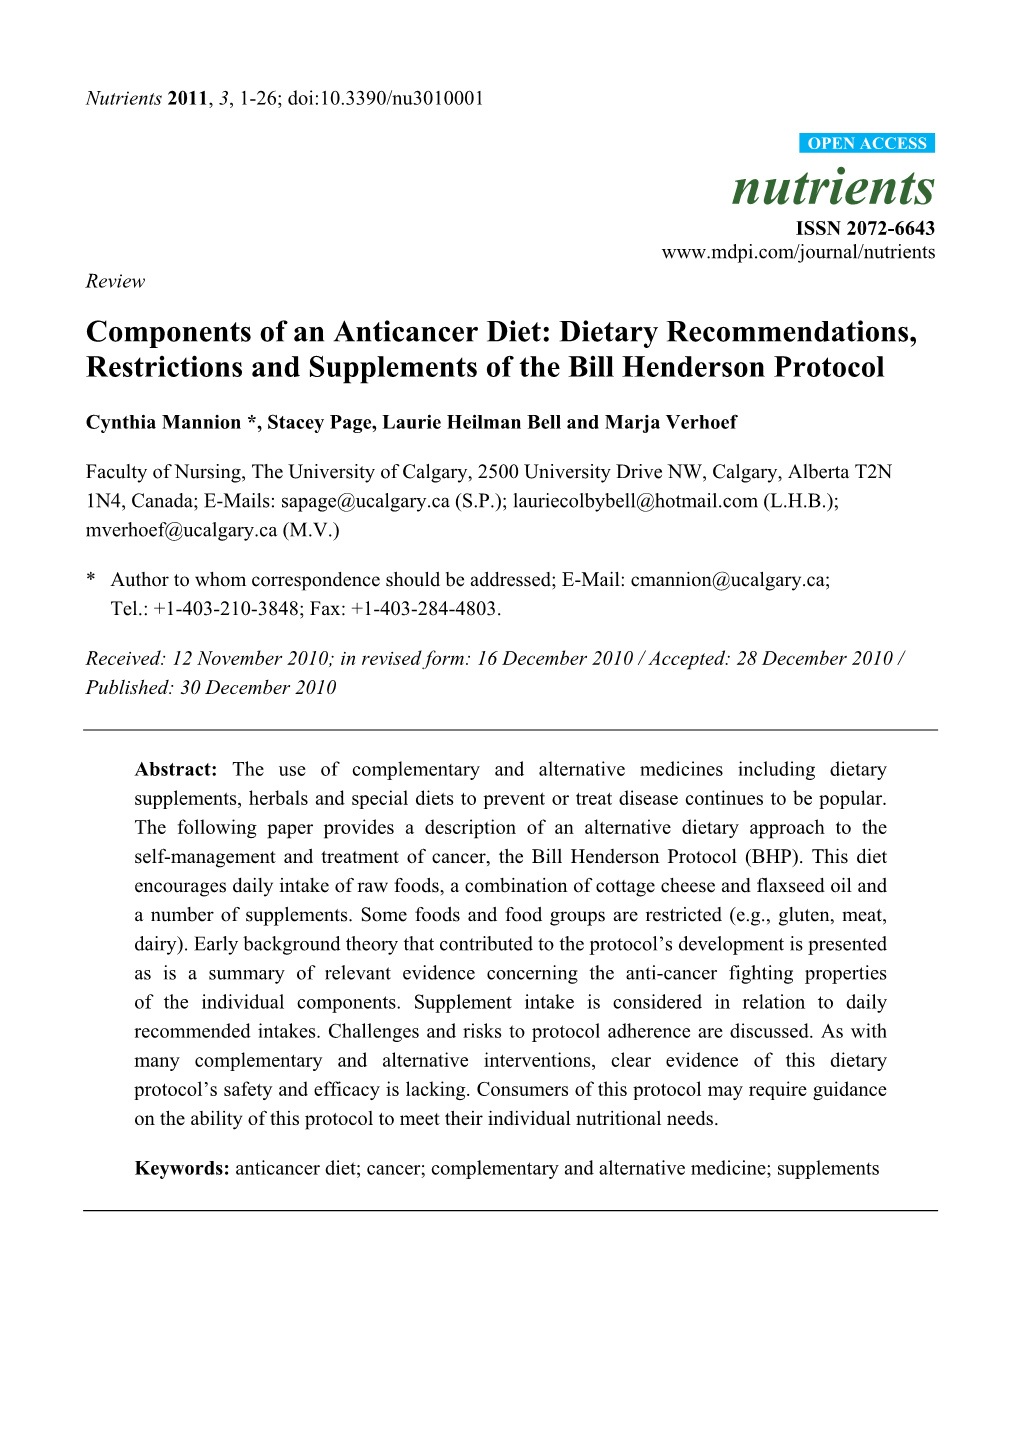 Components of an Anticancer Diet: Dietary Recommendations, Restrictions and Supplements of the Bill Henderson Protocol